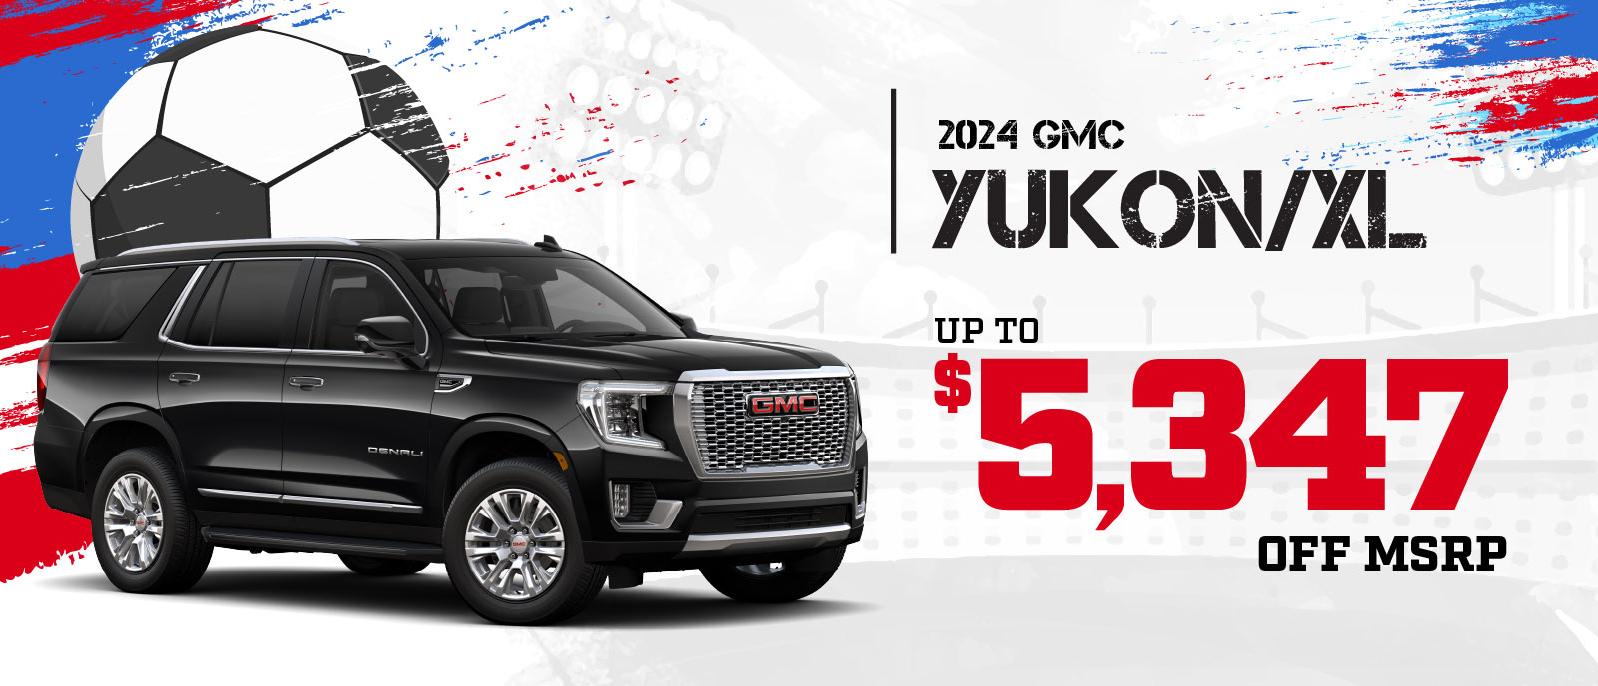 New GMC Yukon - up to $5347 OFF MSRP